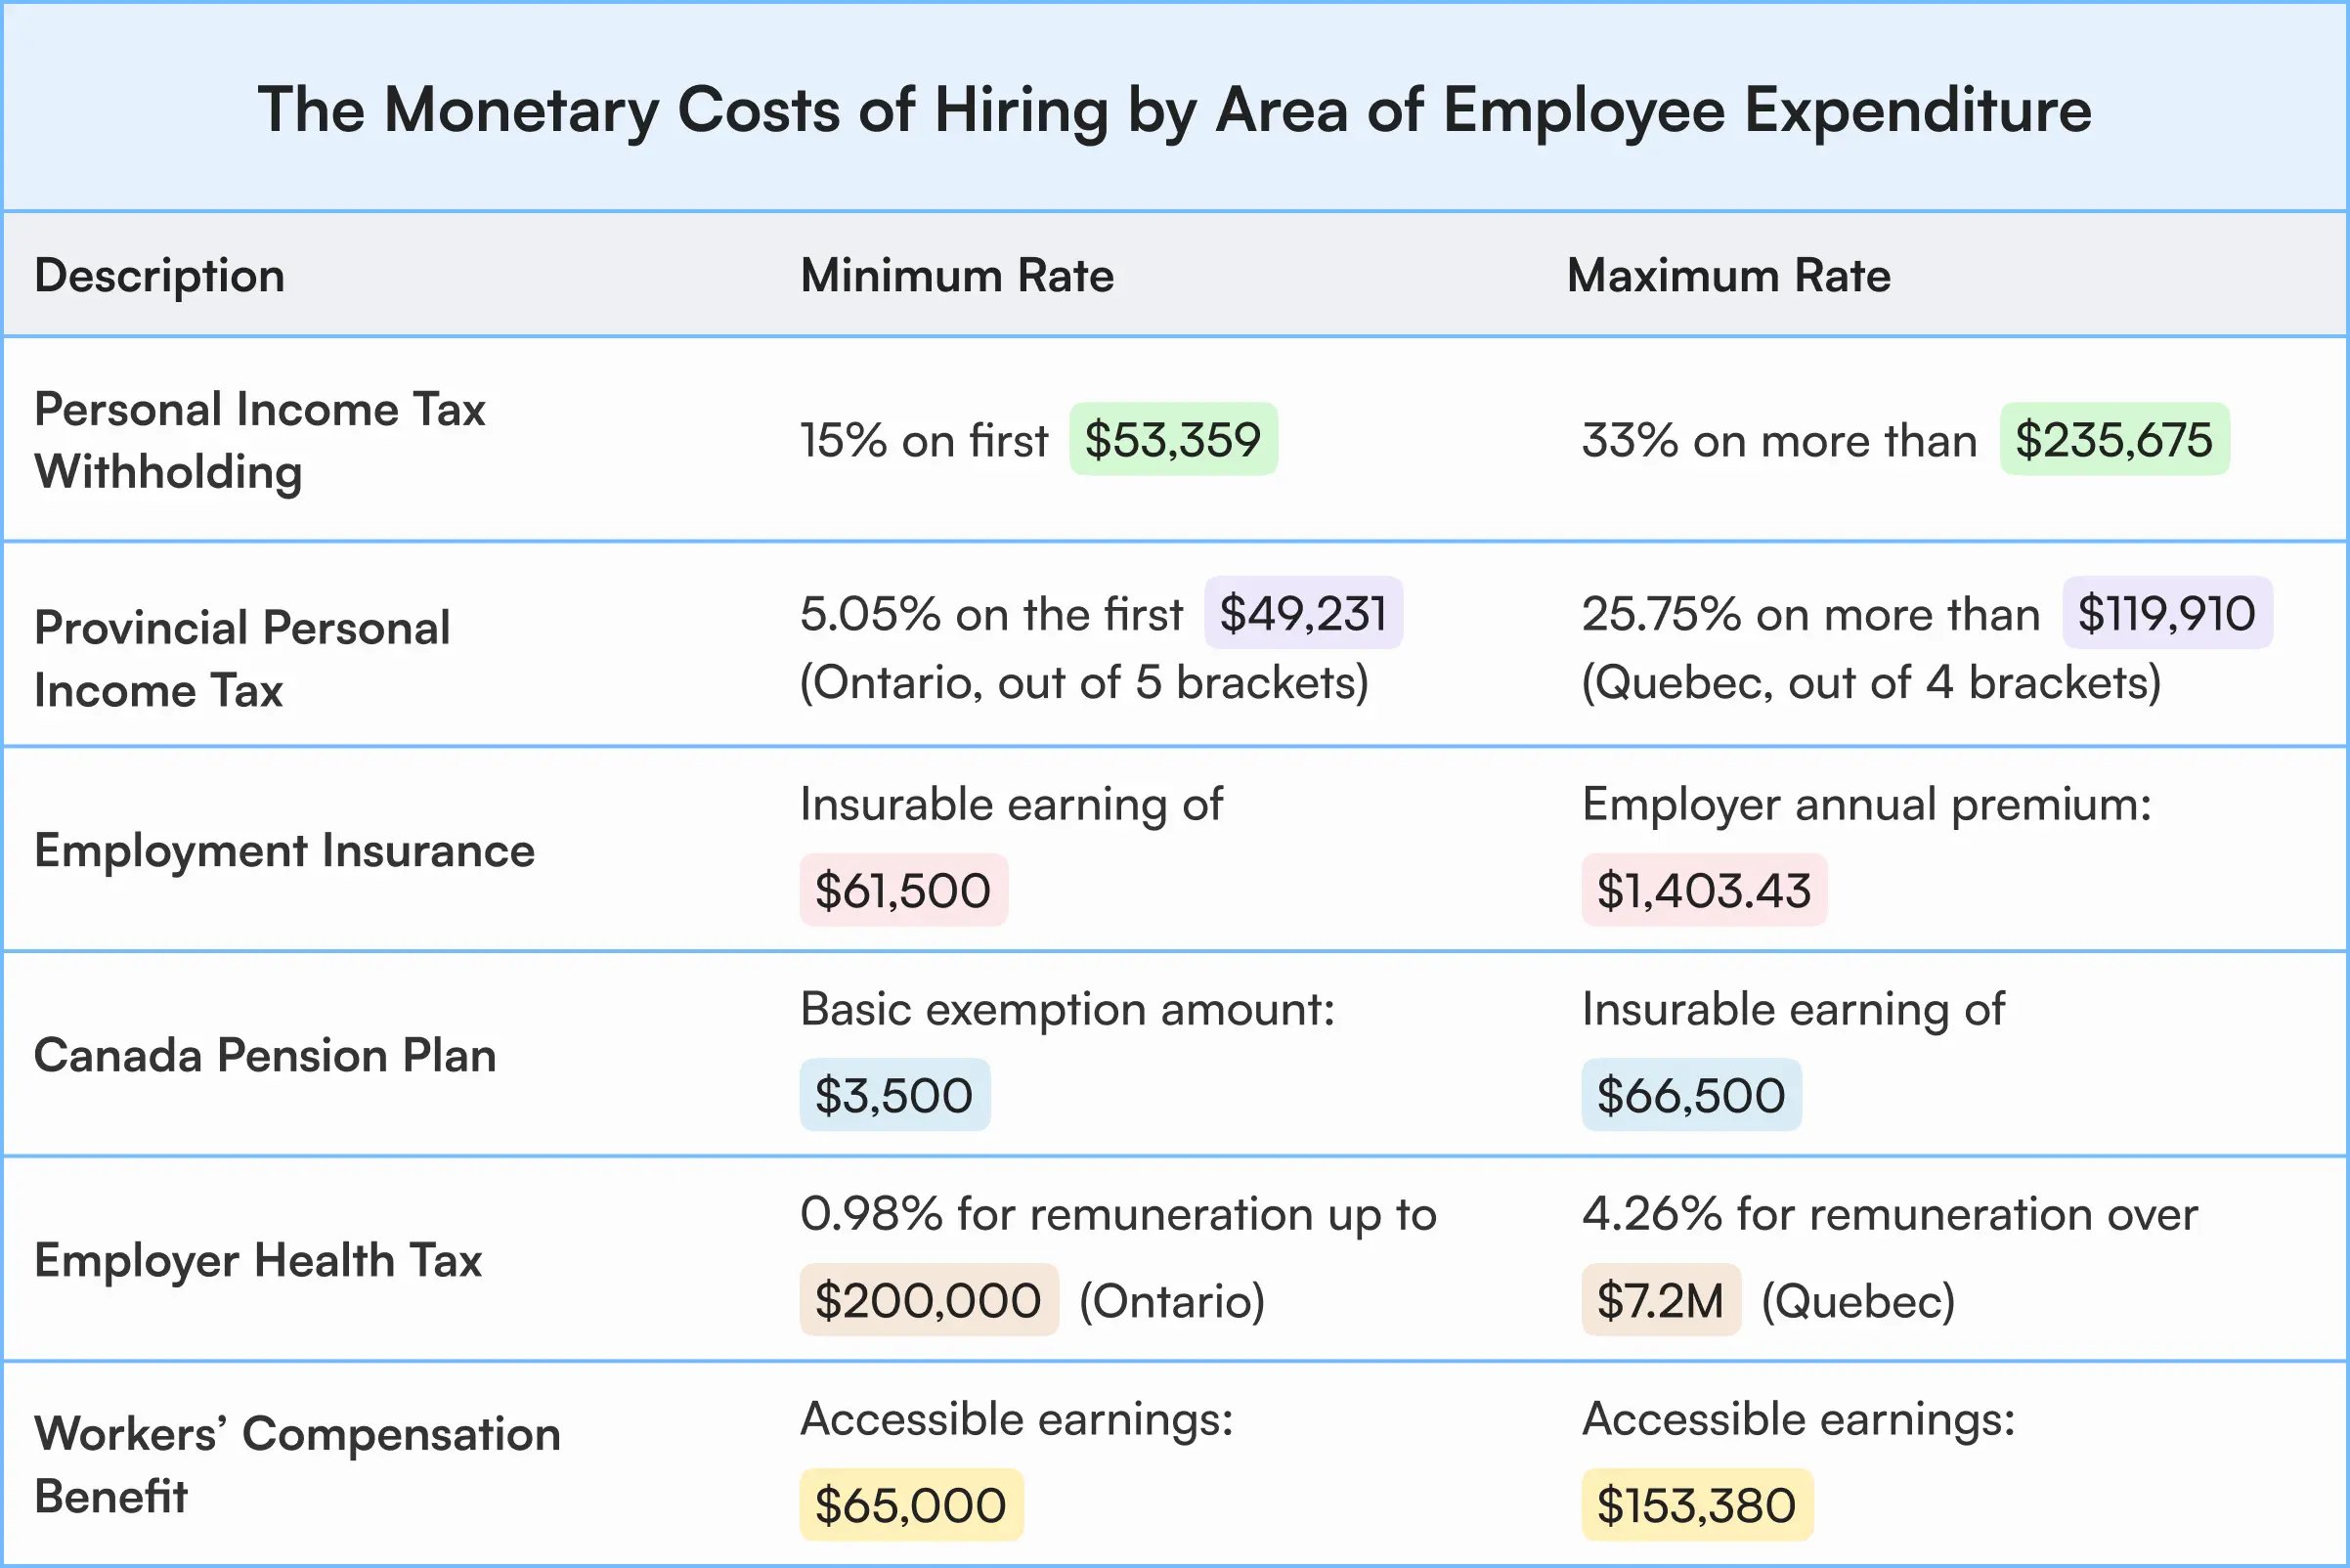 The Monetary Costs of Hiring by Area of Employee Expenditure